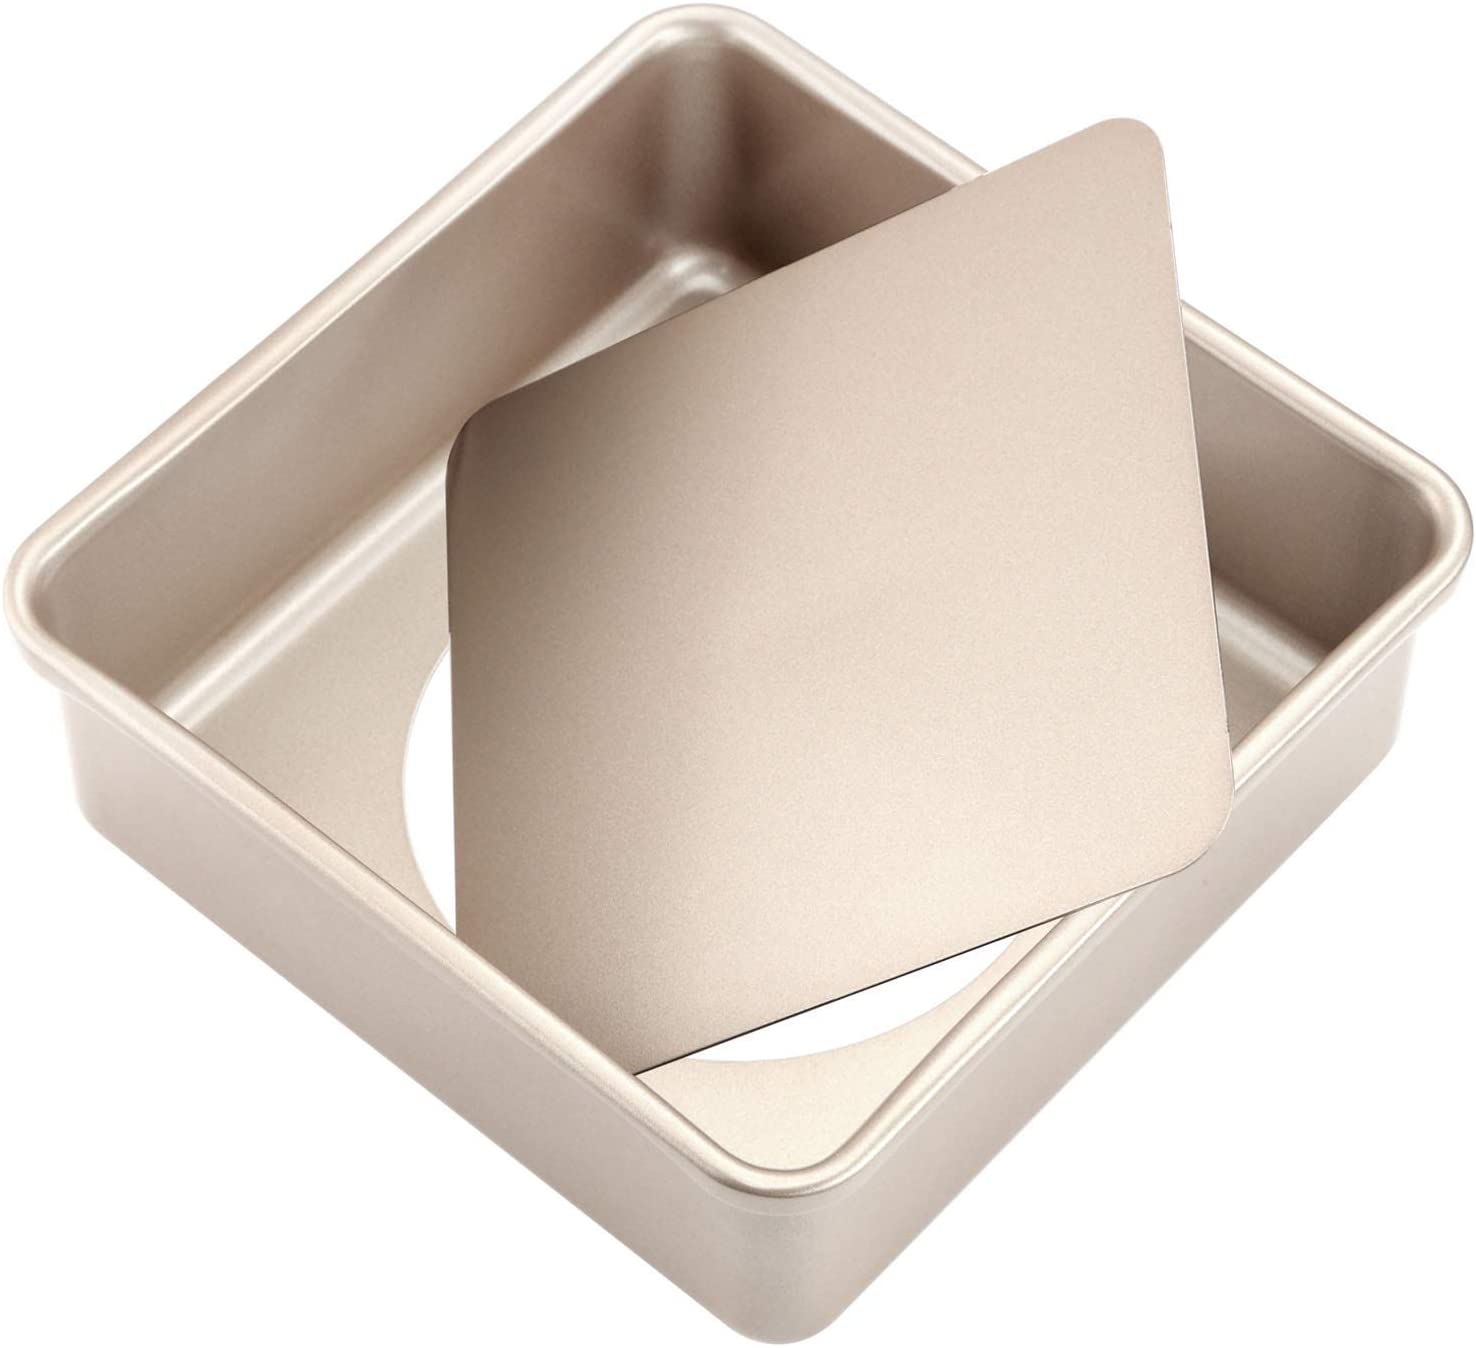 CHEFMADE 9-Inch Rectangle Loaf Pan